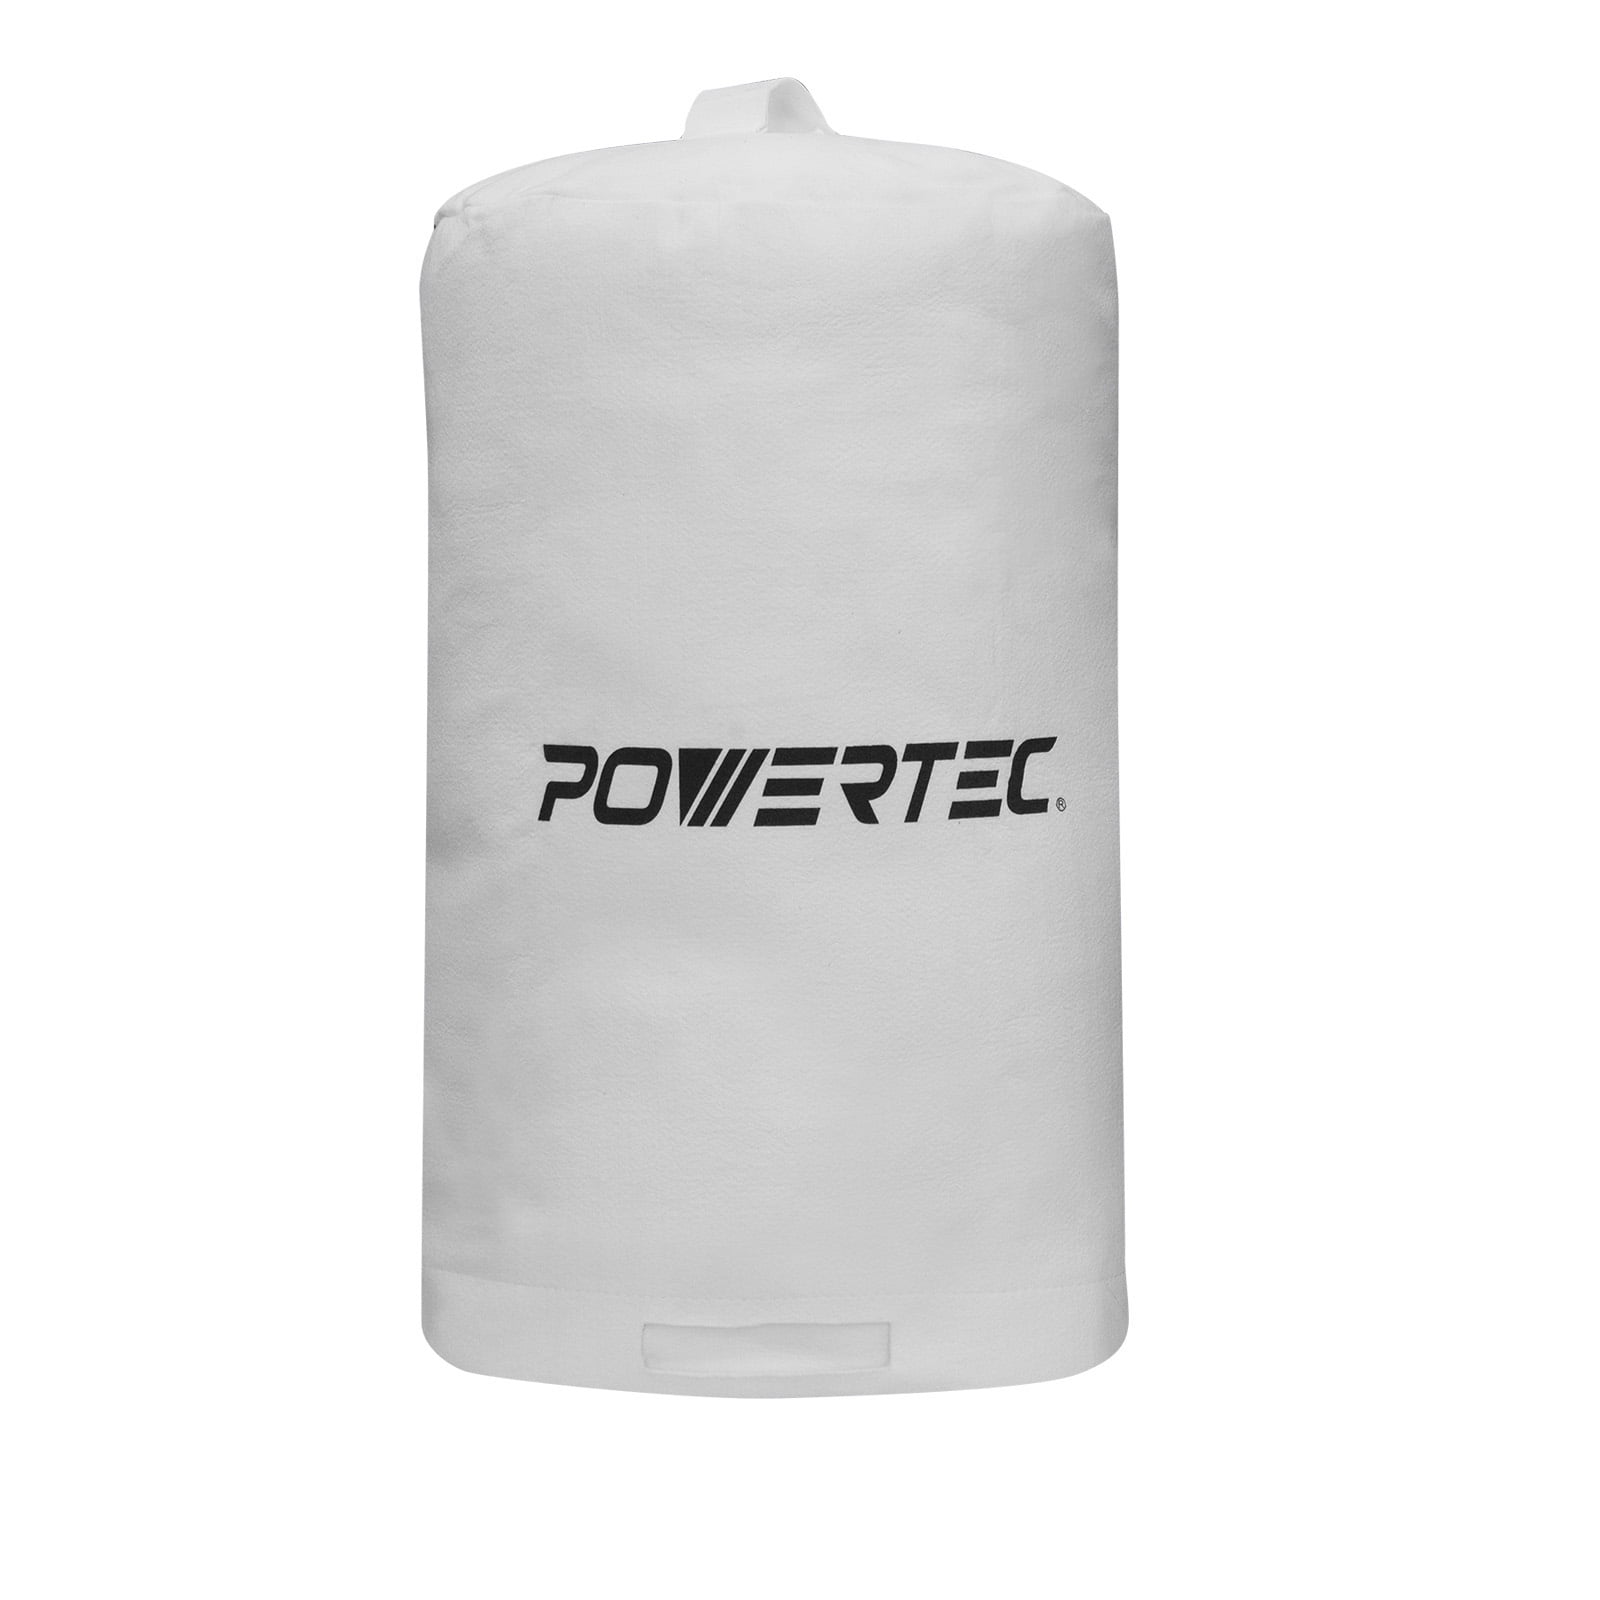 POWERTEC 70005 Dust Filter Bag for Wall Mount Dust Collectors 3 Micron 